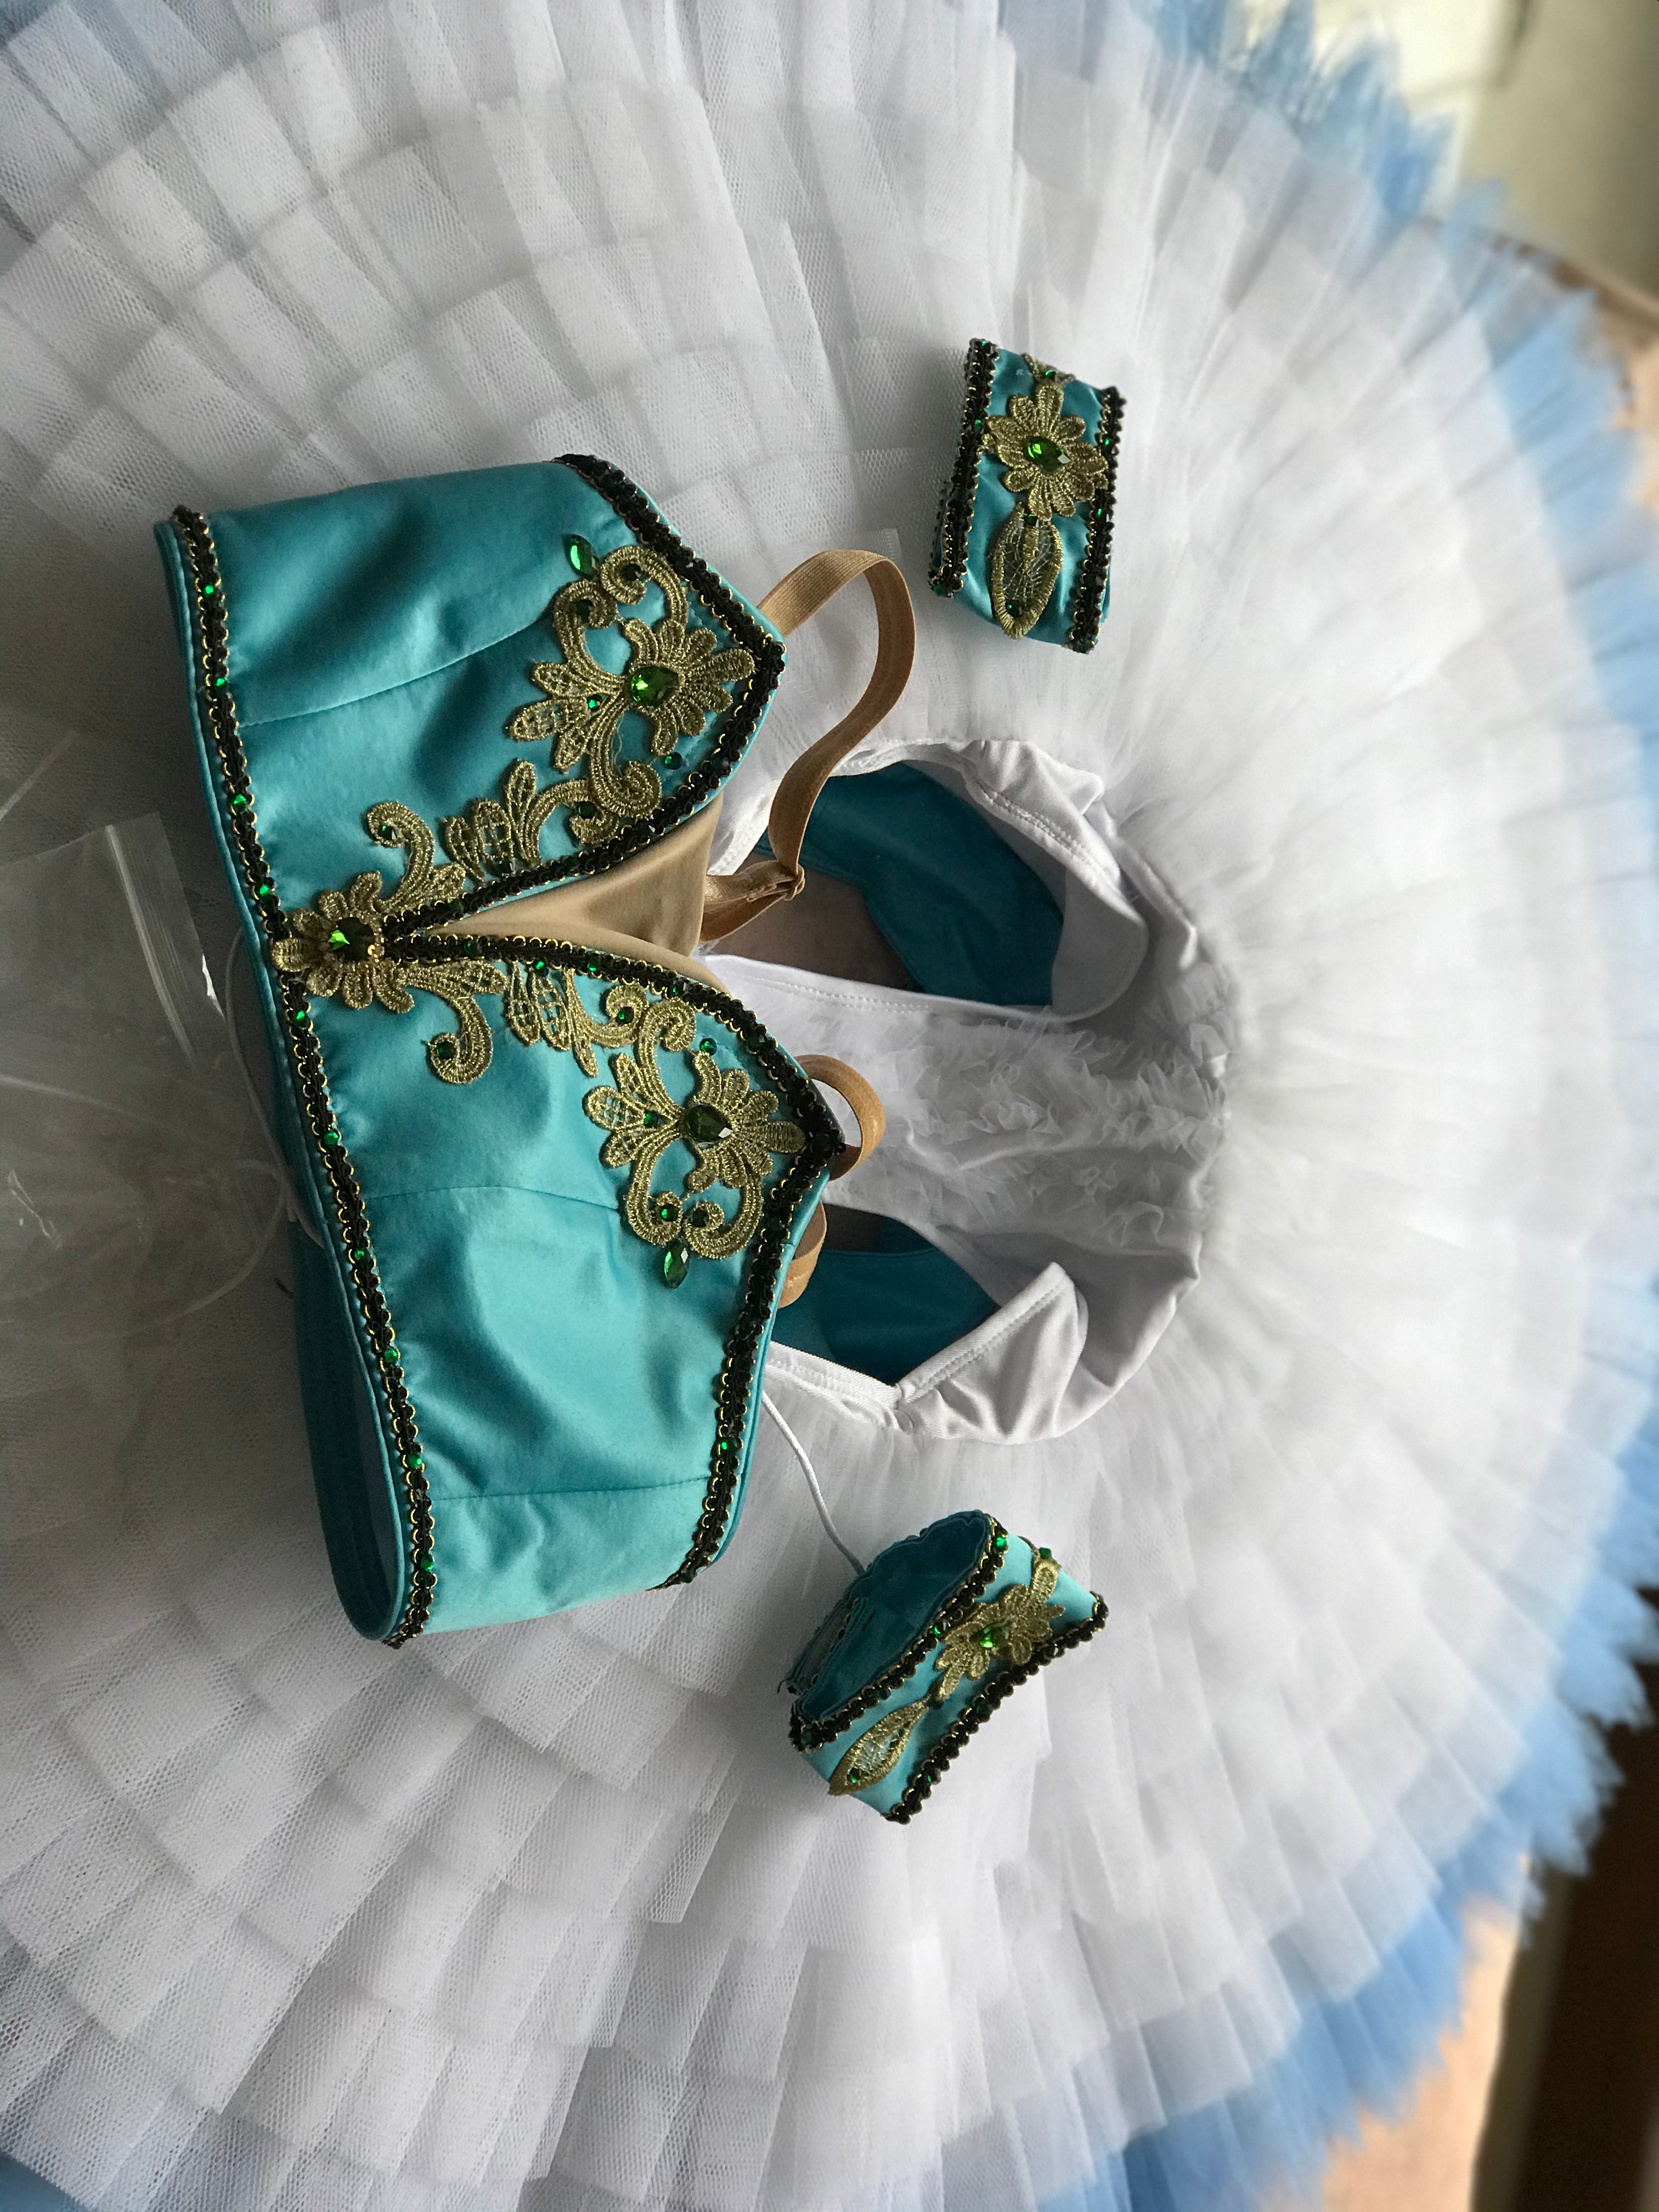 Professional Ballet Tutu Costume 2 Pieces Odalisque Le Corsaire Teal Competition Stage Dance-wear With Hooks